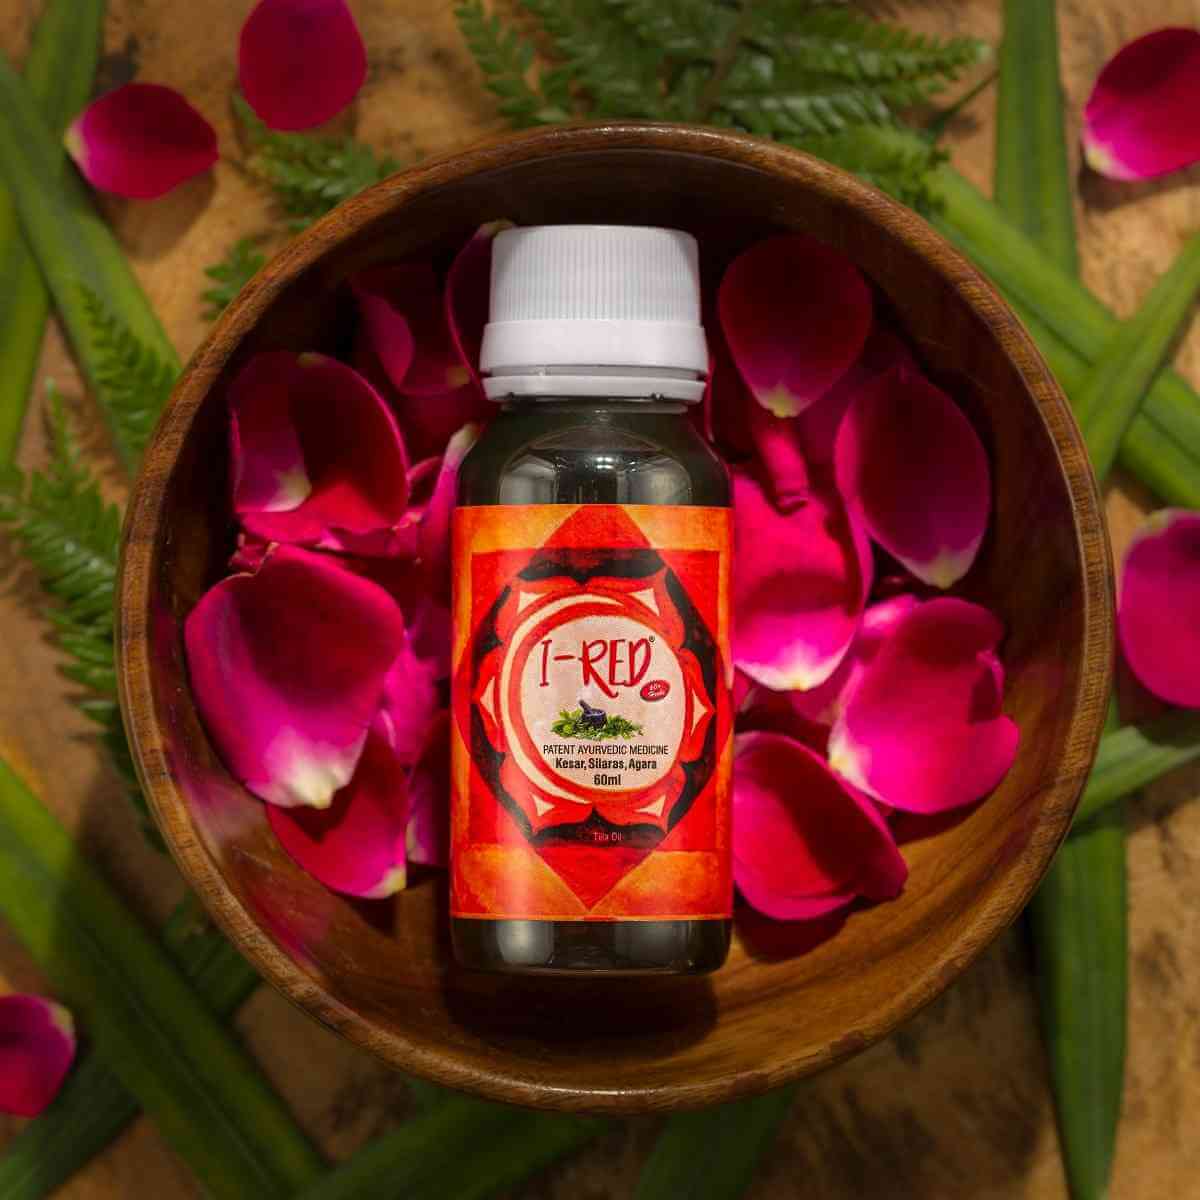 Buy I-RED Oil made with 100% Pure & Natural ingredient